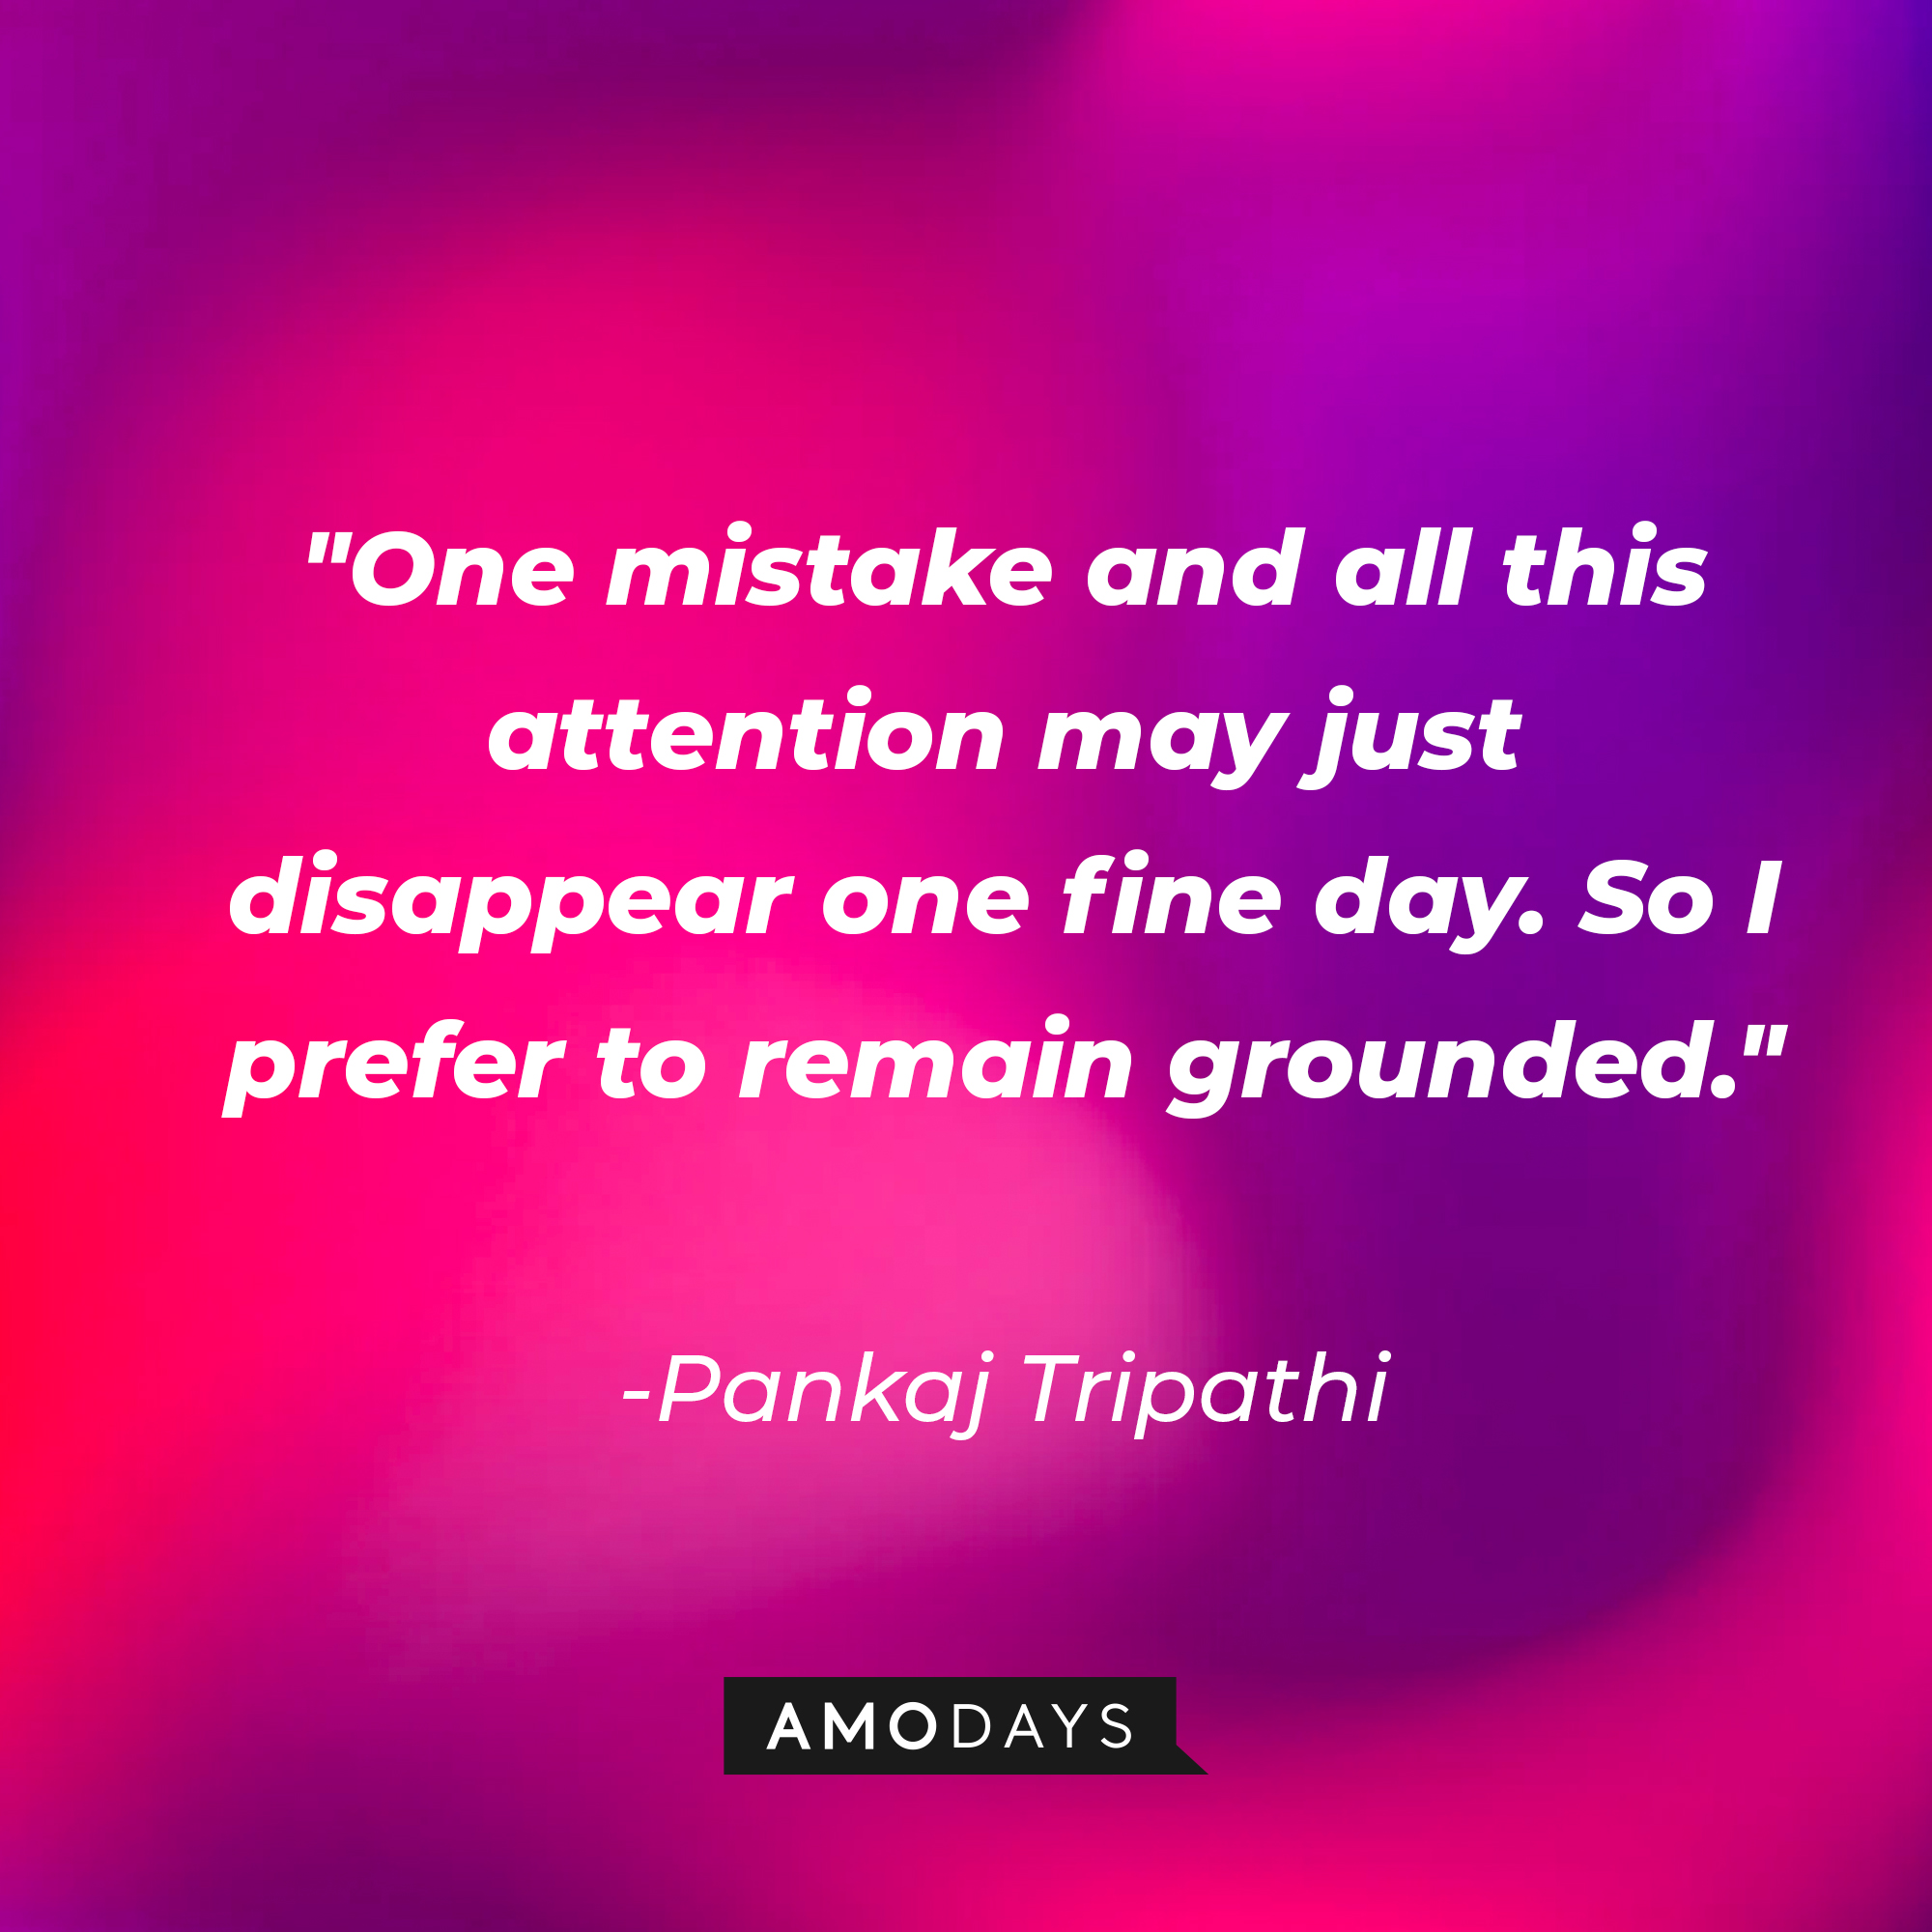 Pankaj Tripathi's quote: "One mistake and all this attention may just disappear one fine day. So I prefer to remain grounded." | Image: AmoDays